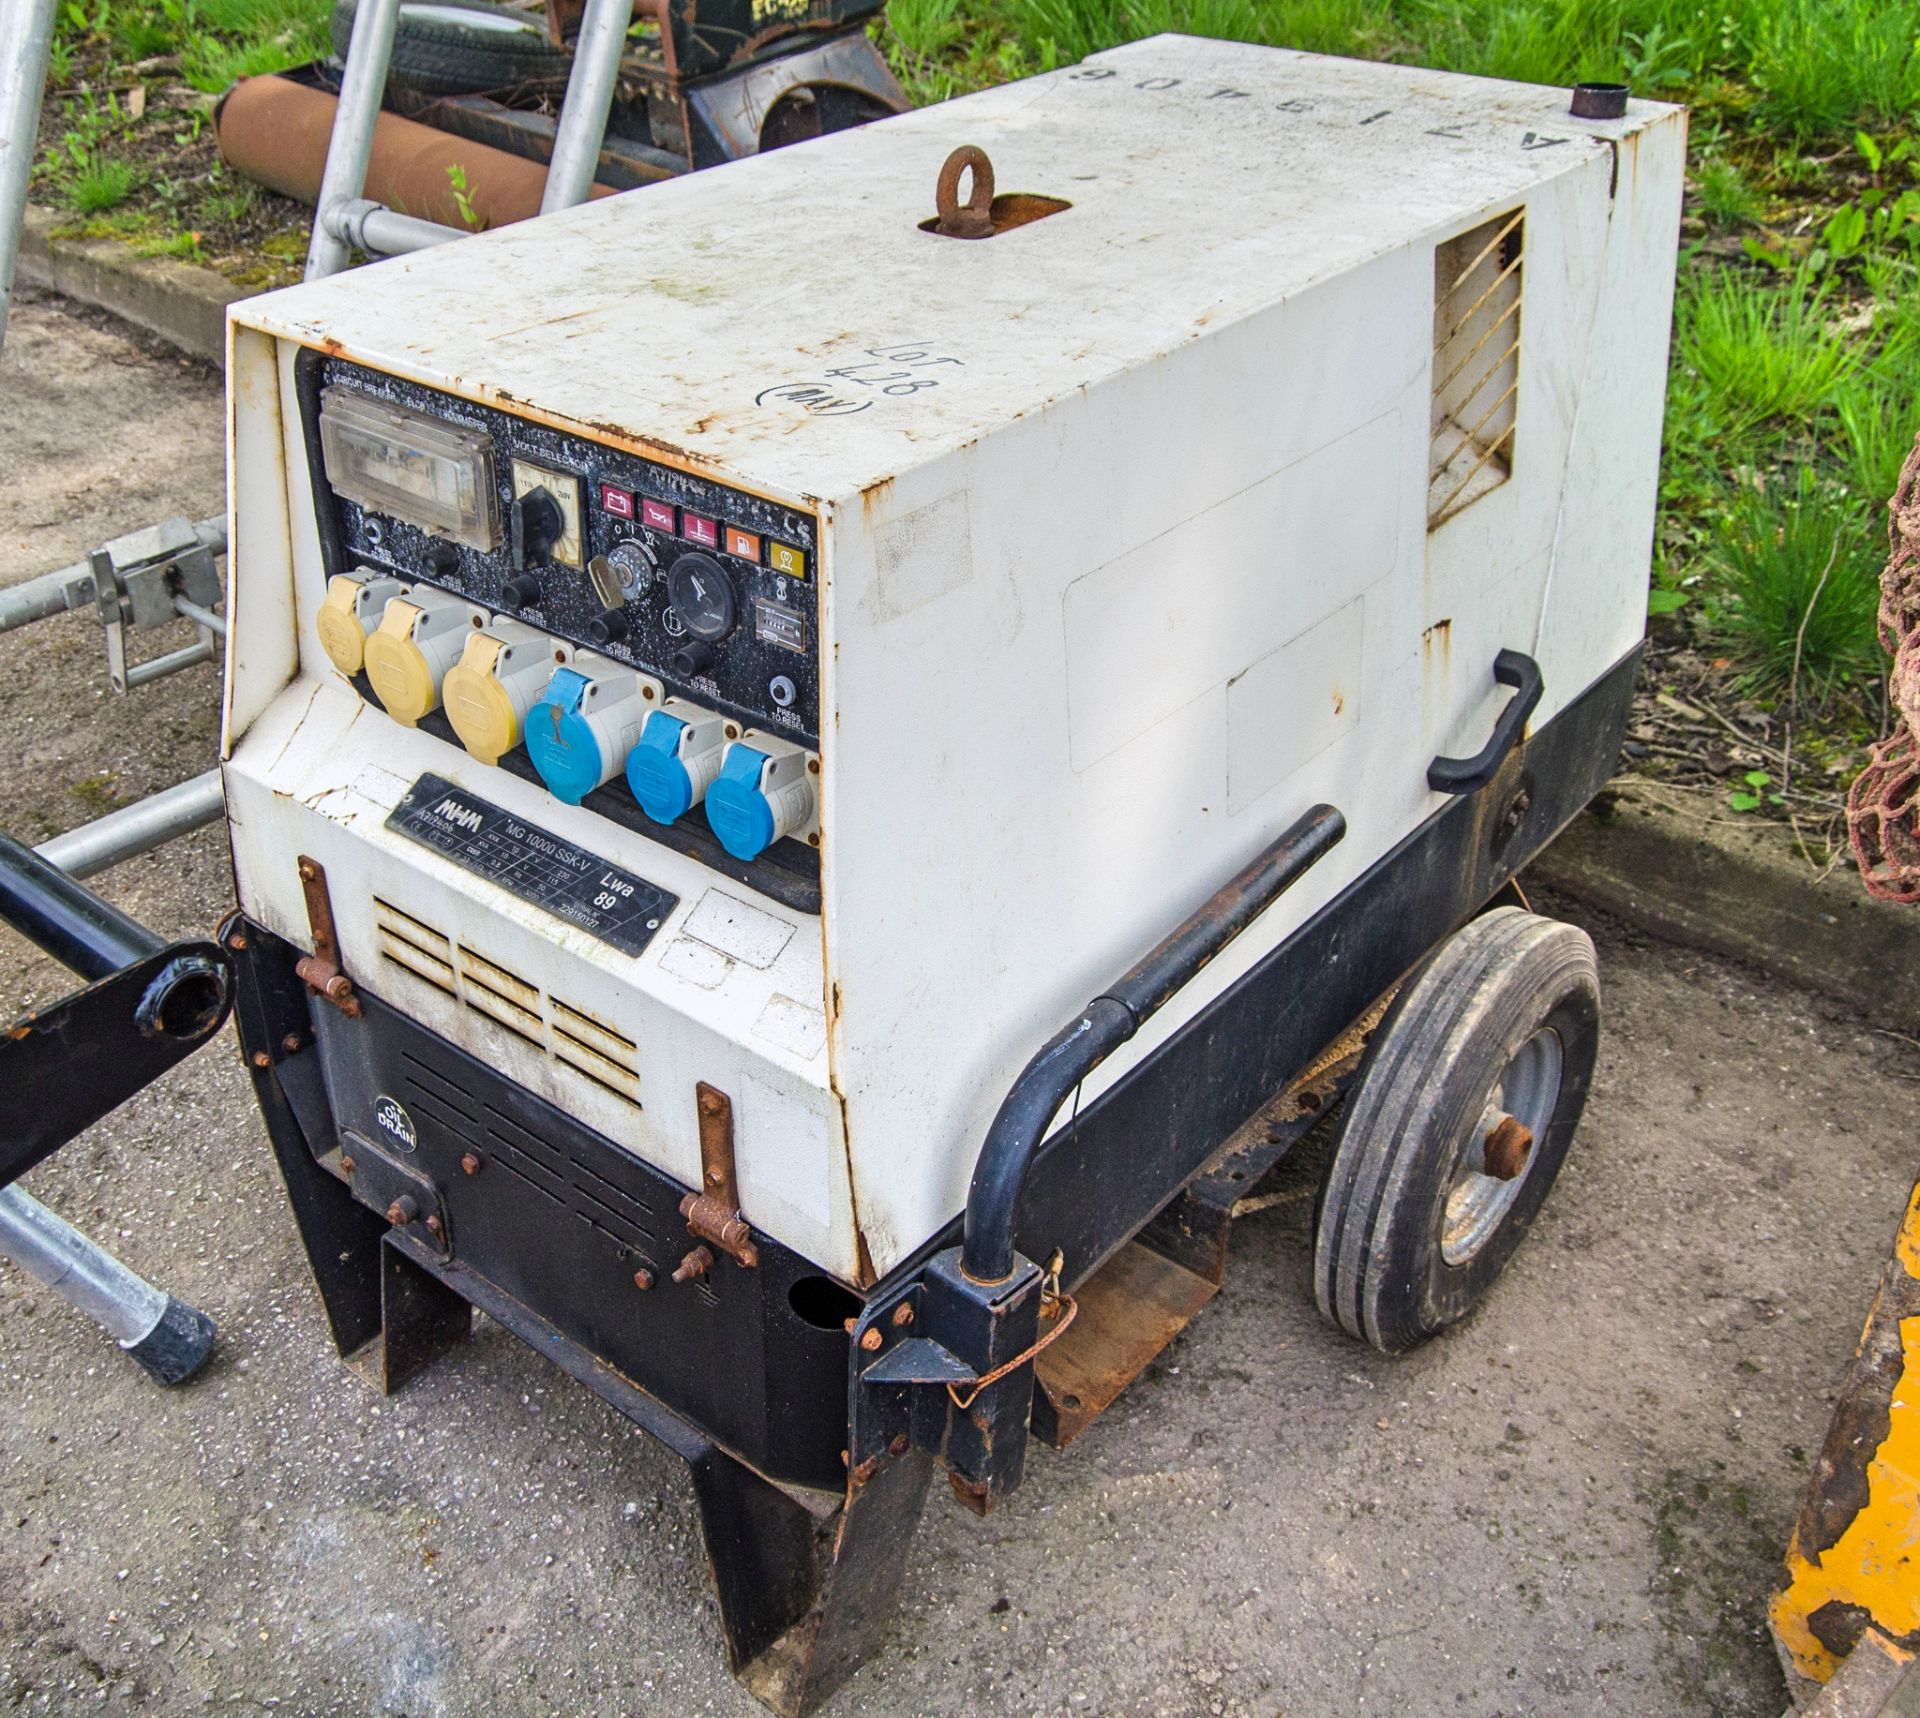 MHM MG1000 SSK-V 10 kva diesel driven generator S/N: 229150127 Recorded hours: 1867 A719406